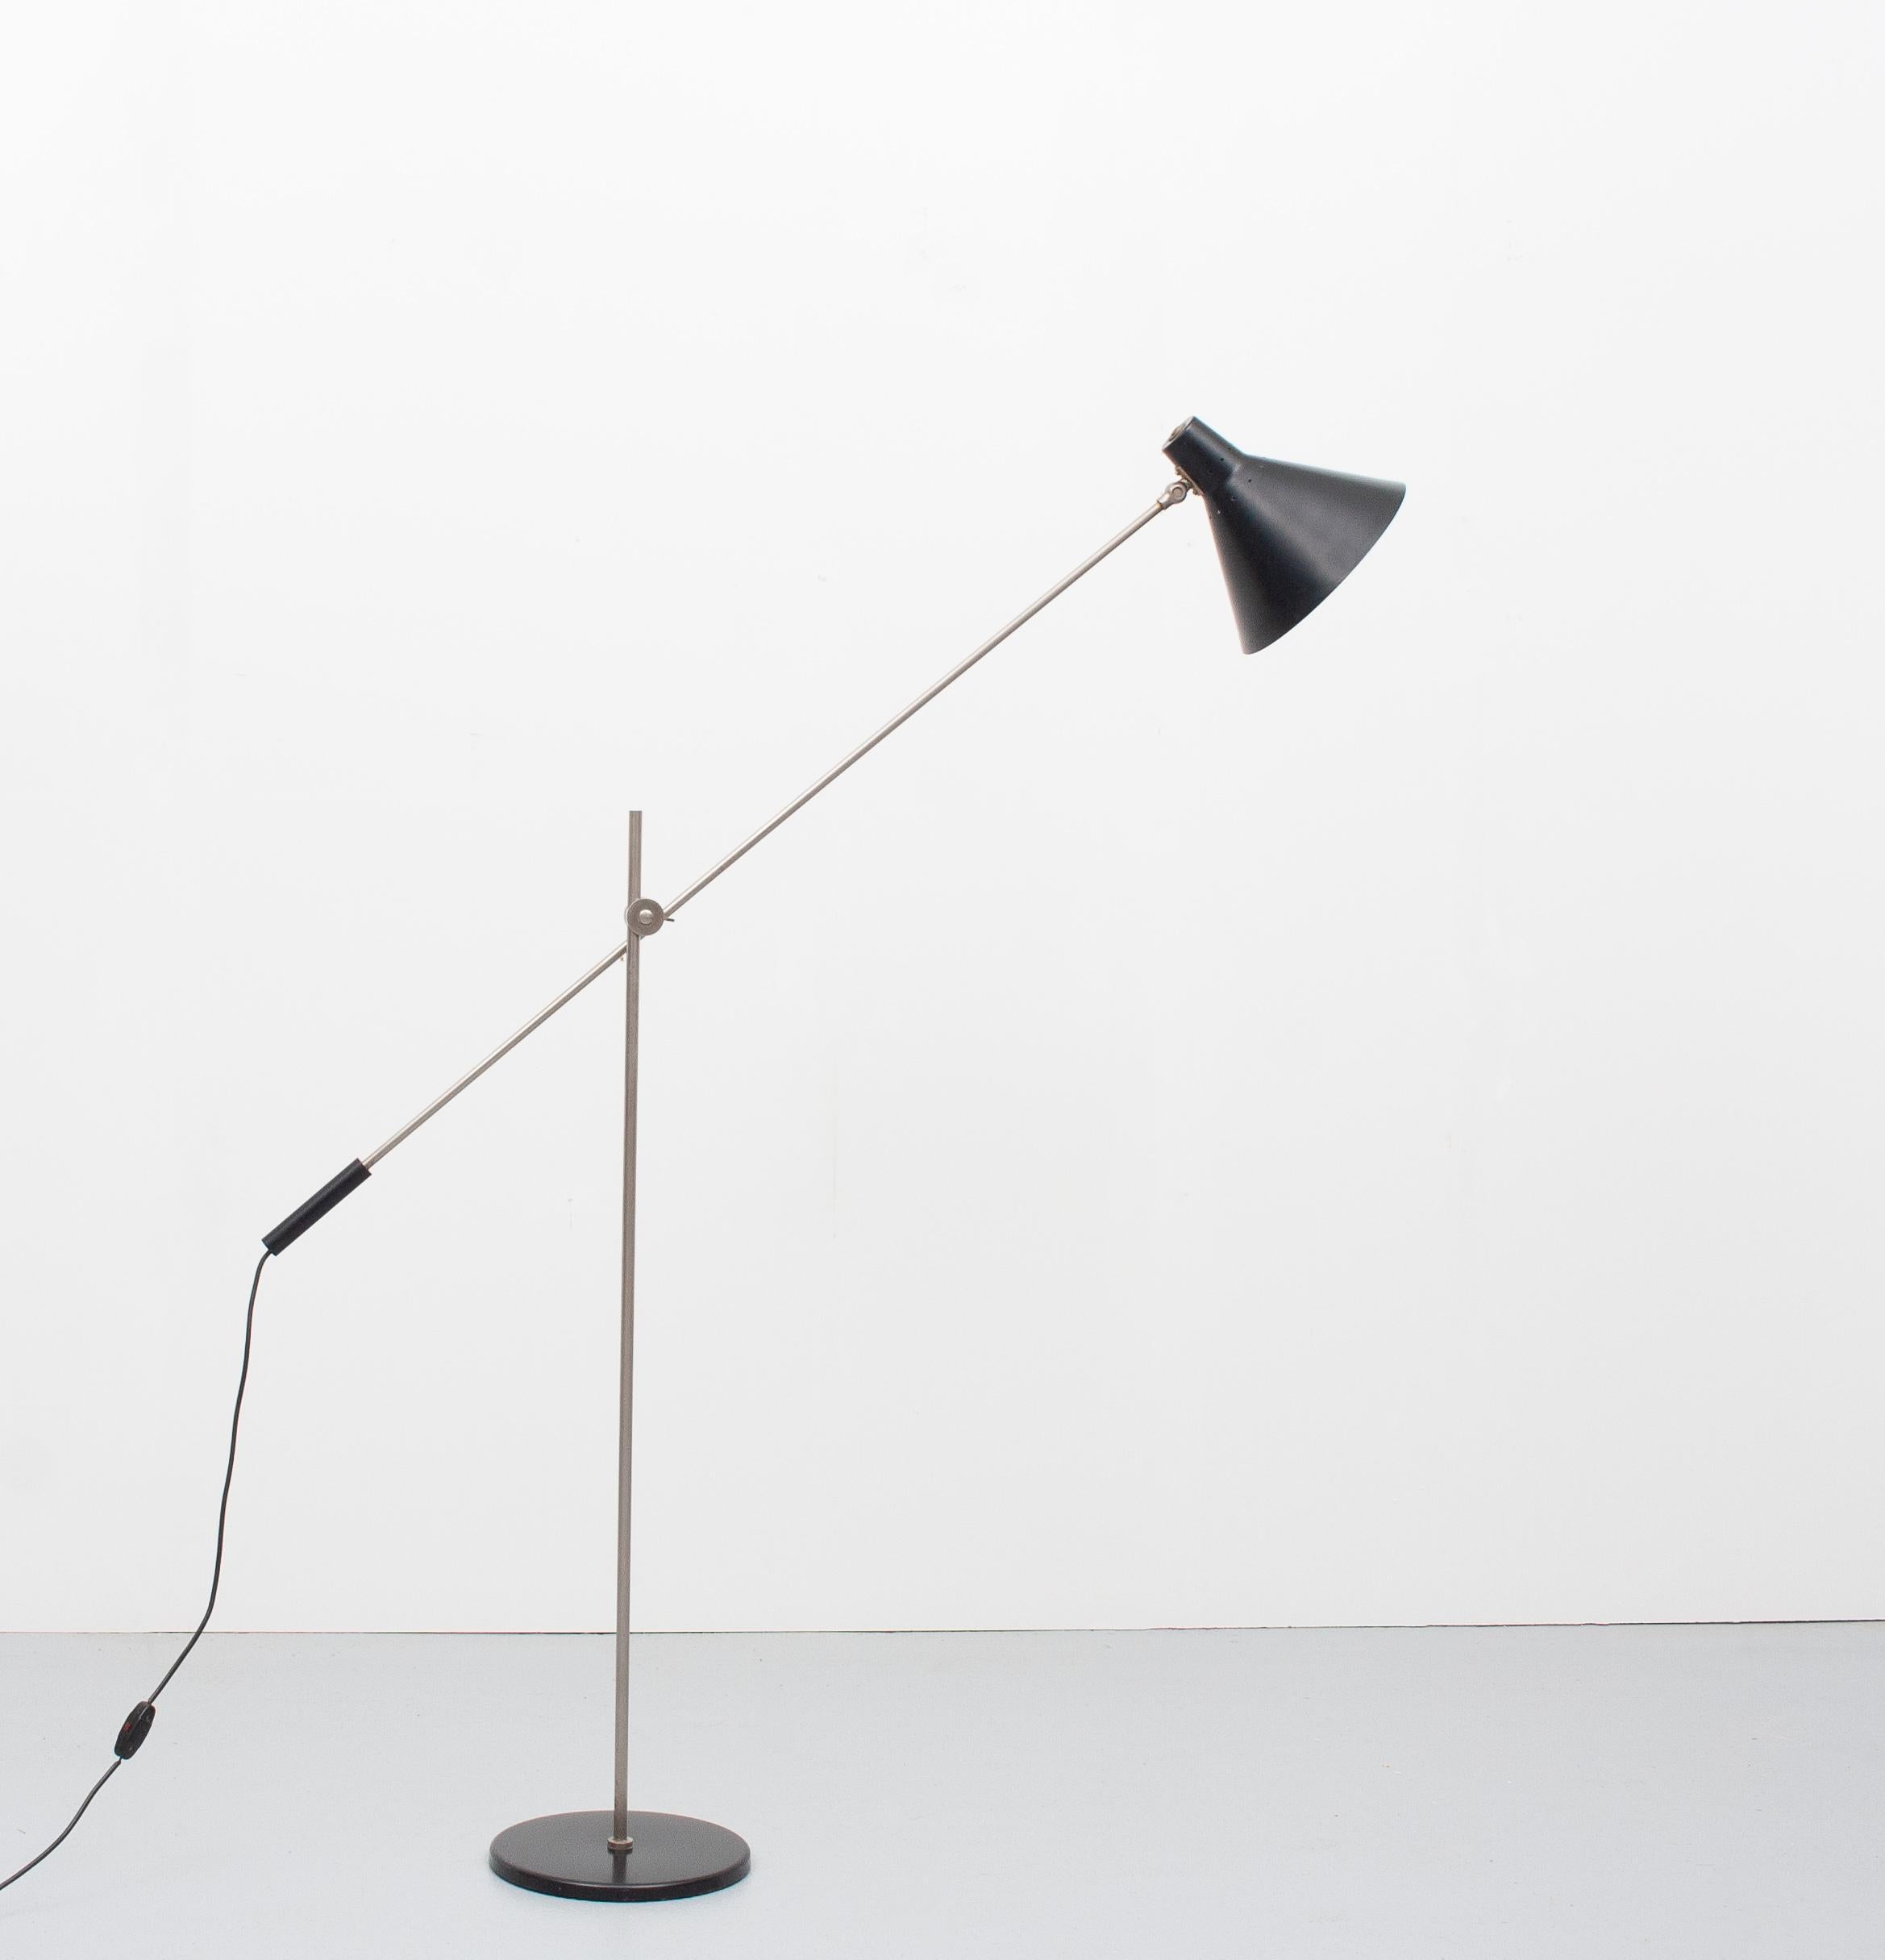 Very nice sleek mid century floor lamp. Adjustable in height and direction. Black perforated shade.
Nickel upright. Black heavy base. Very good condition. With normal user marks.